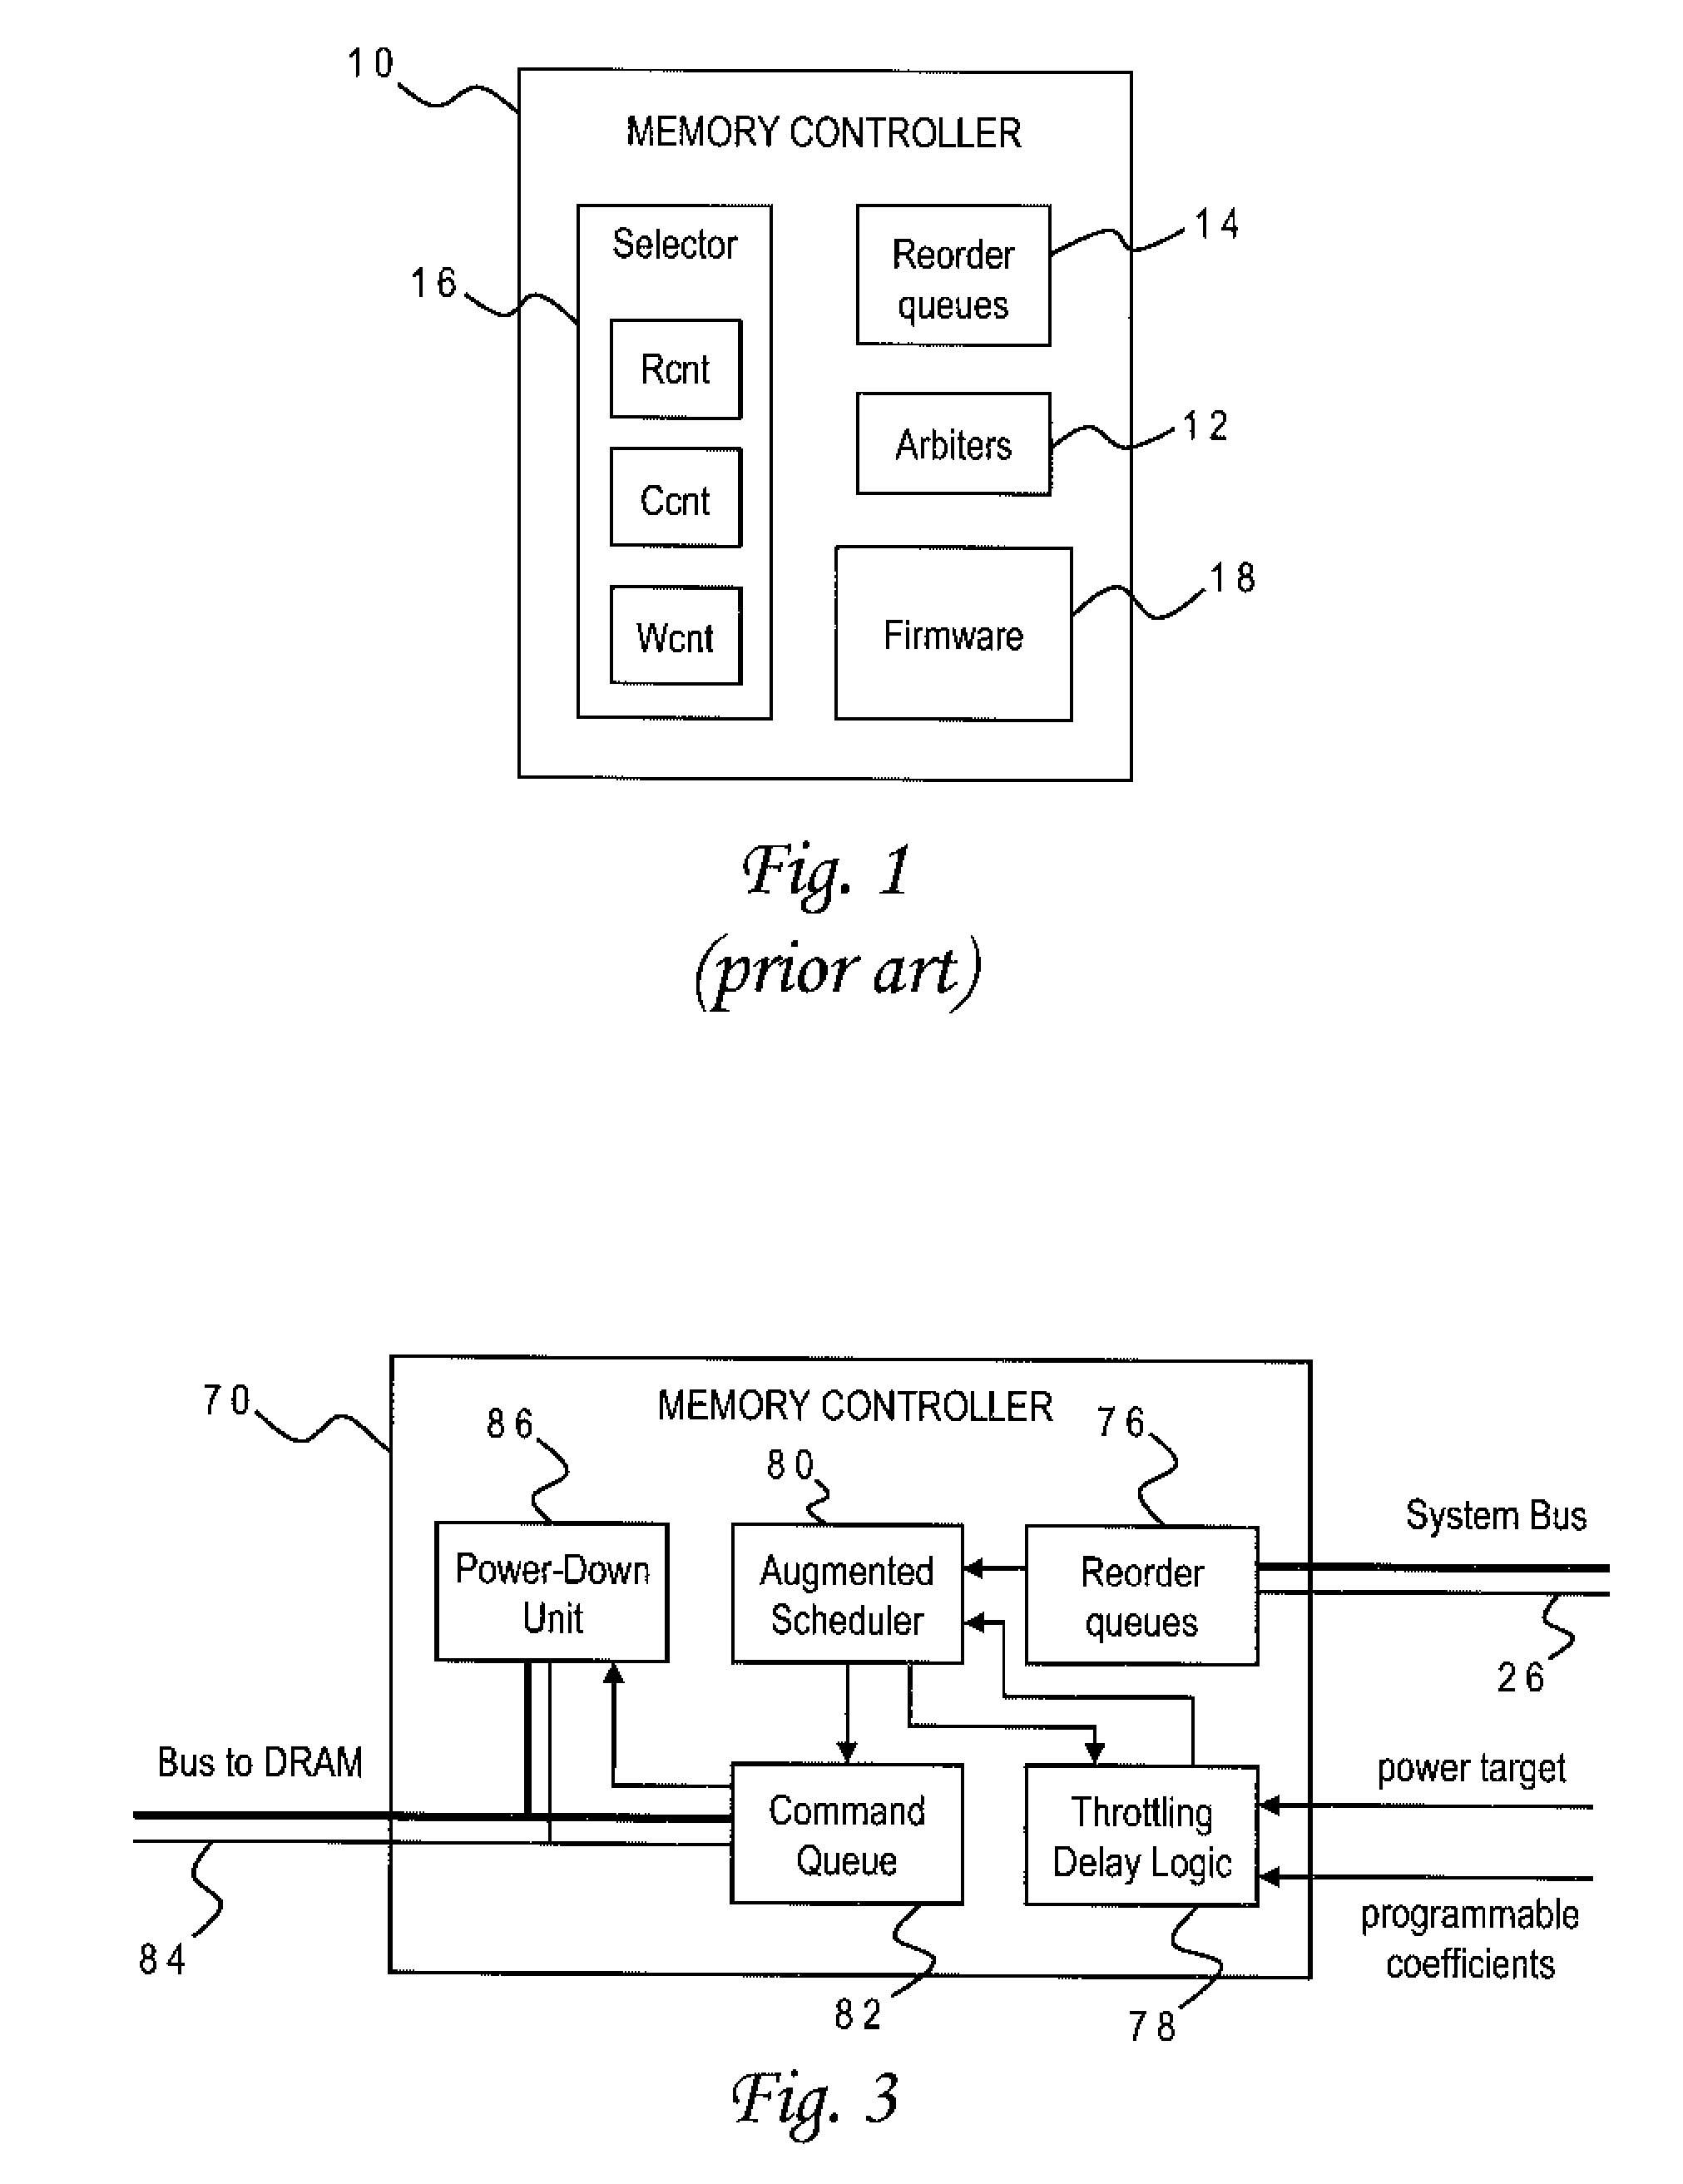 DRAM Power Management in a Memory Controller